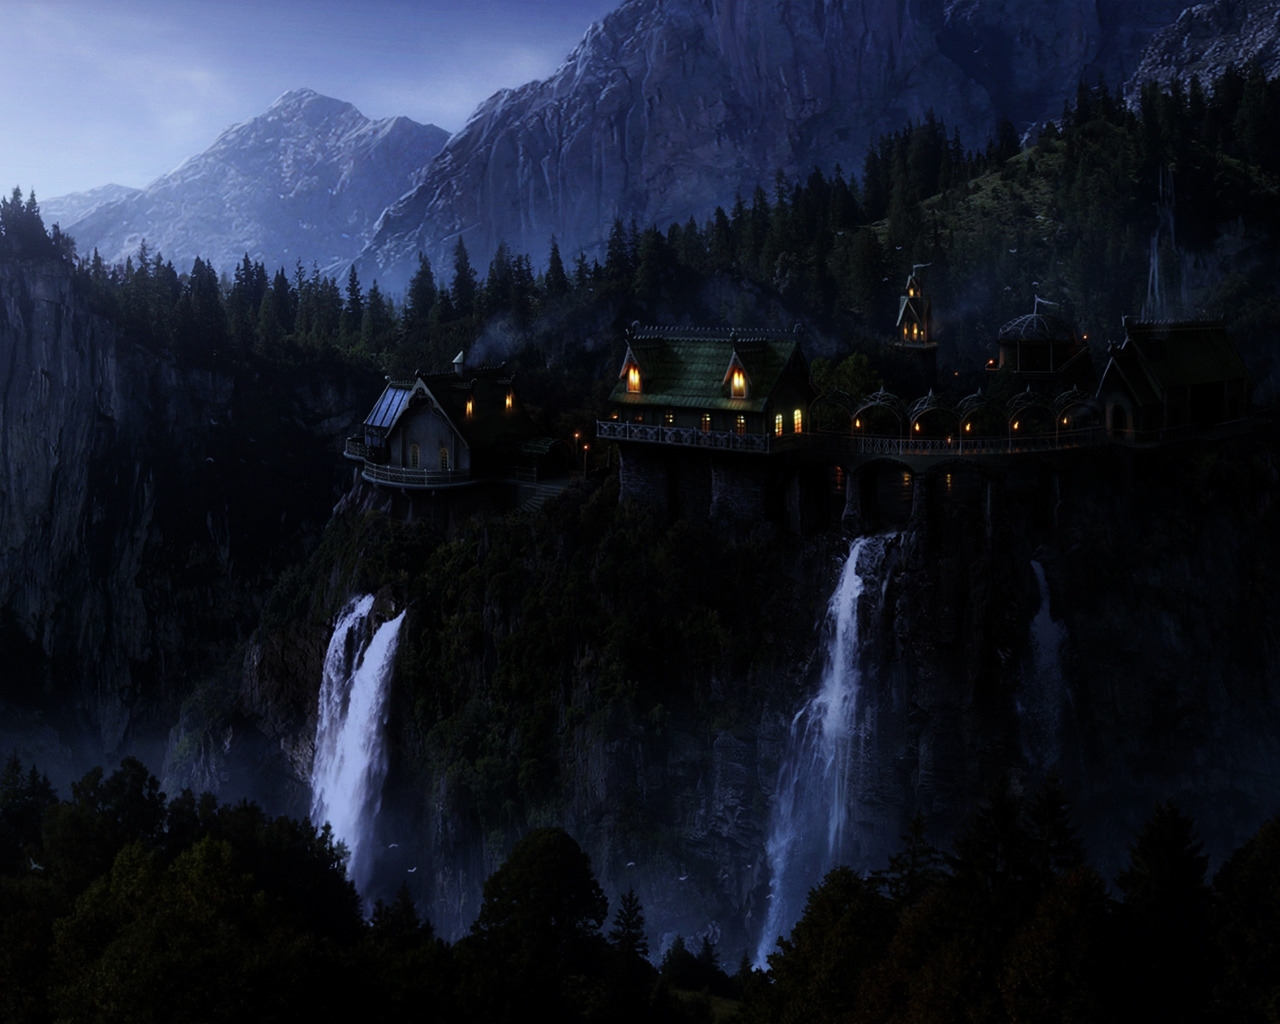 The Lord of the Rings Rivendell for 1280 x 1024 resolution